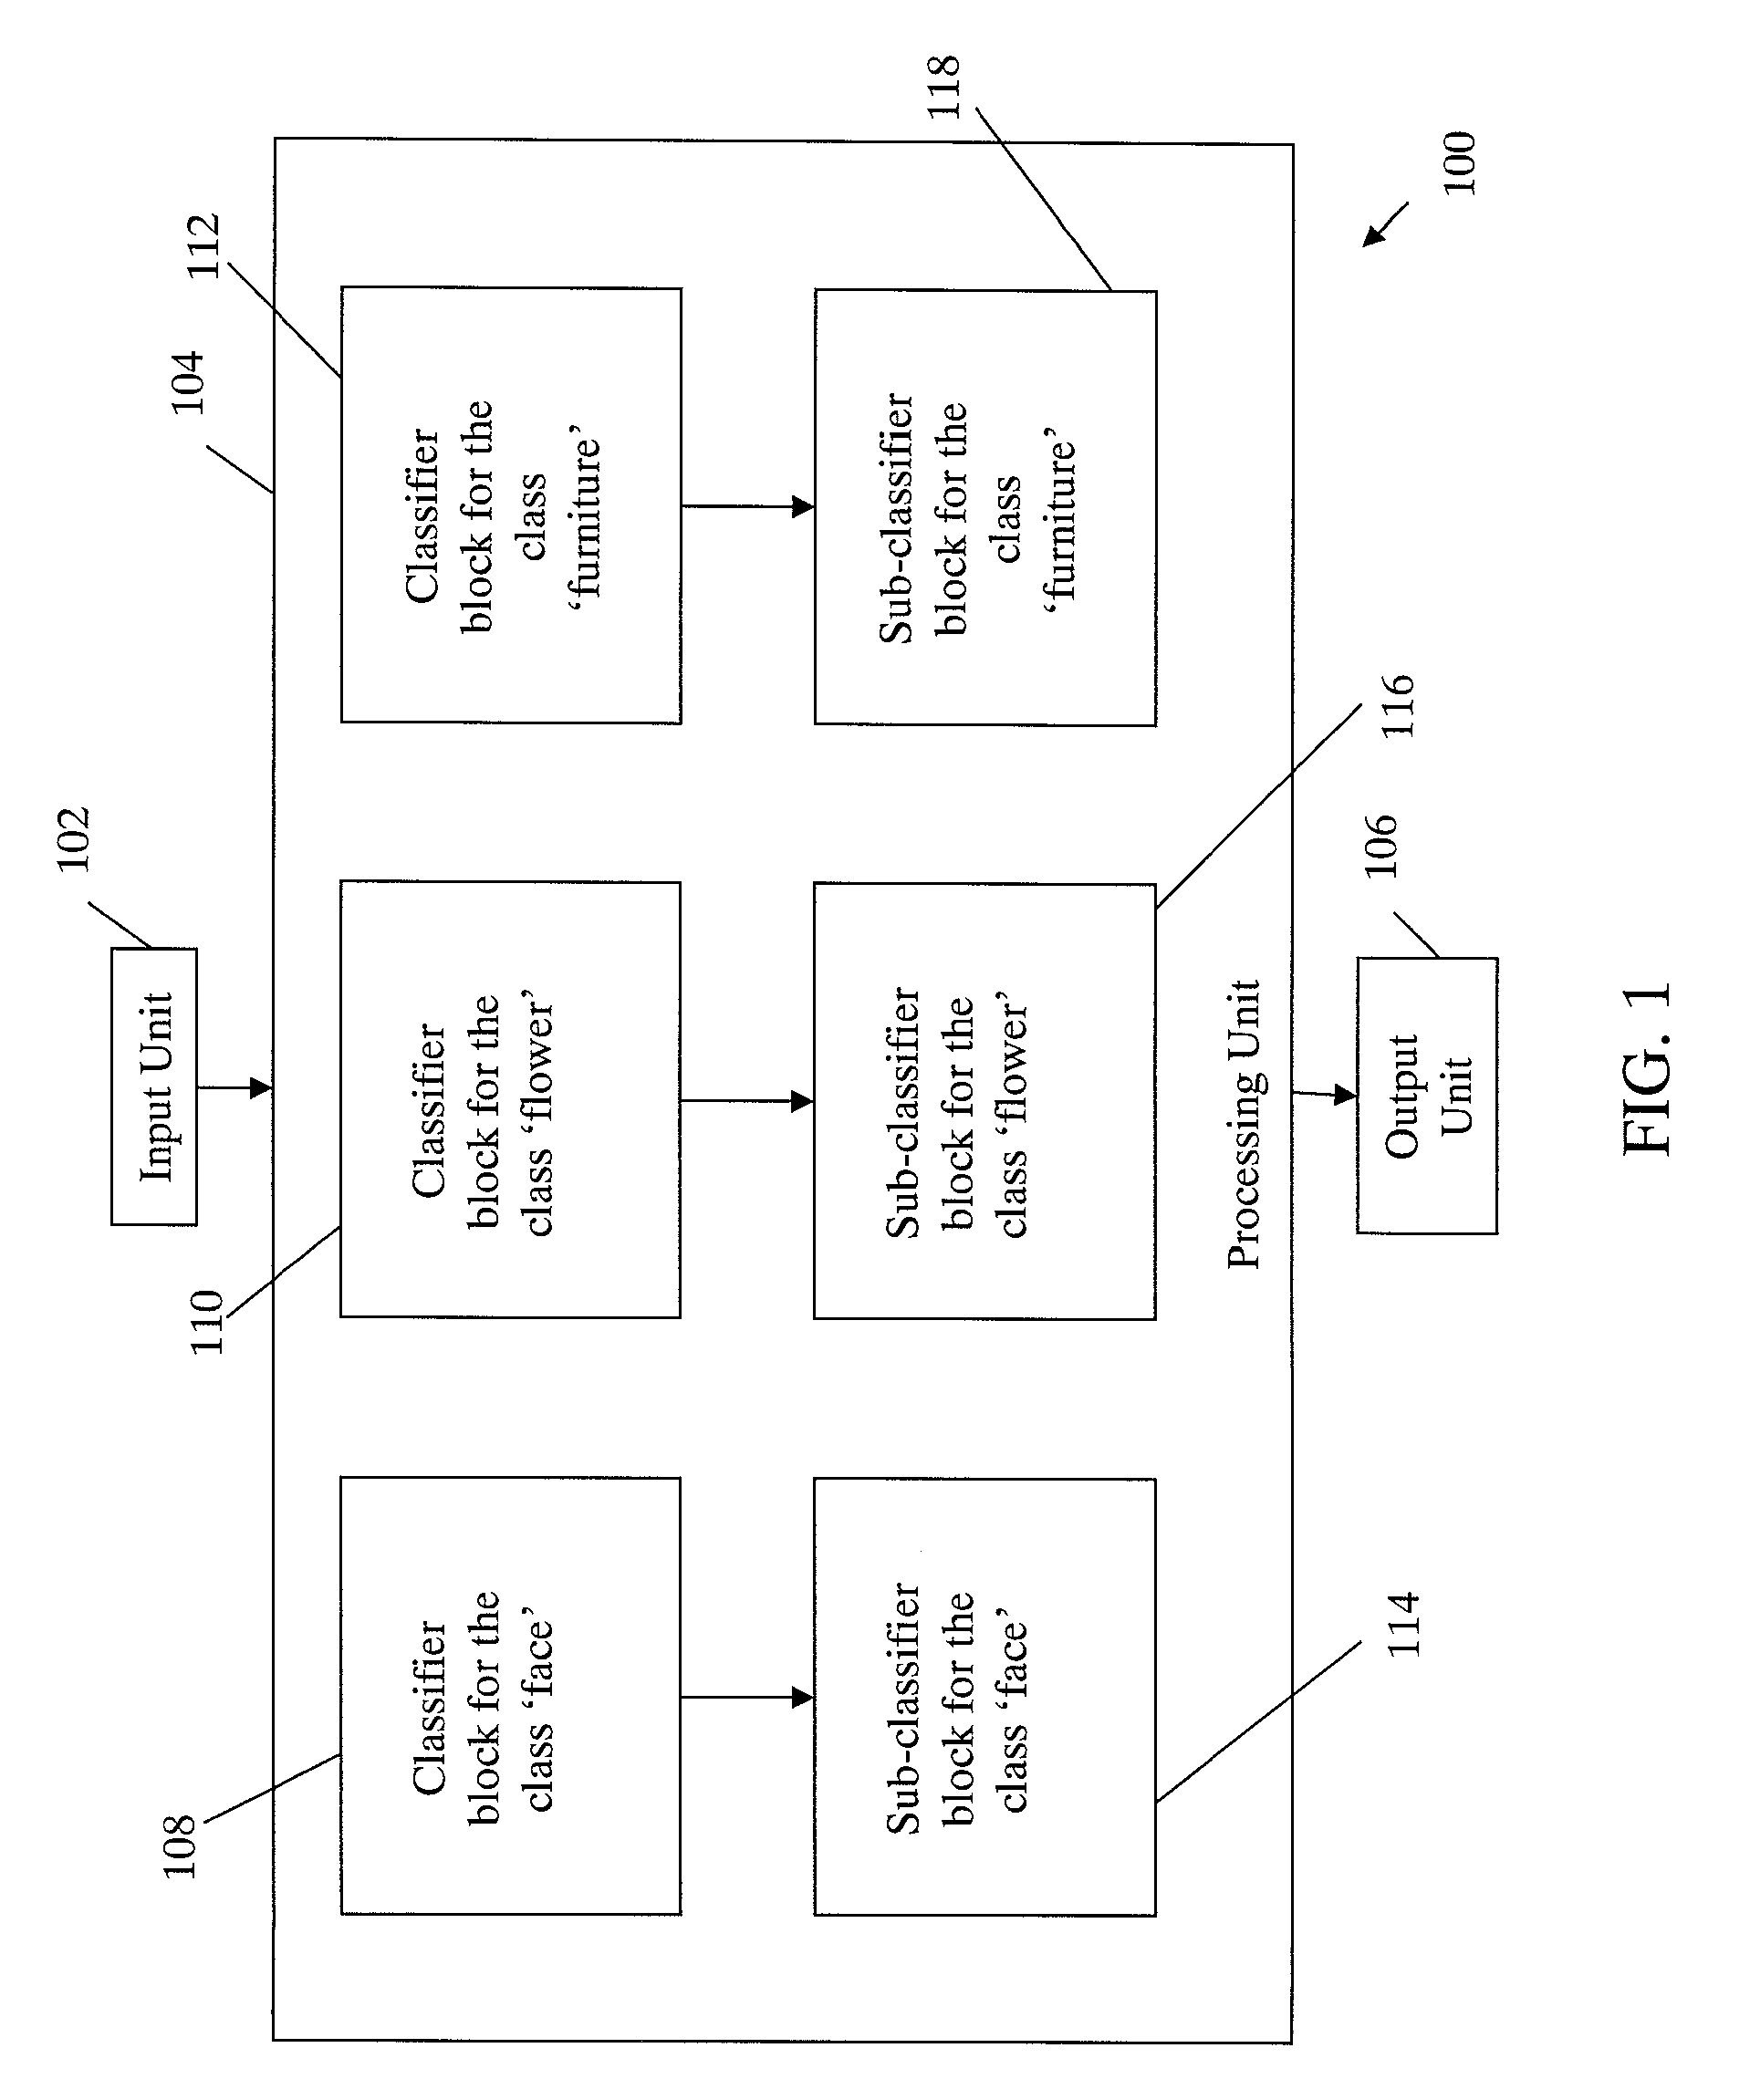 System and method for identifying patterns